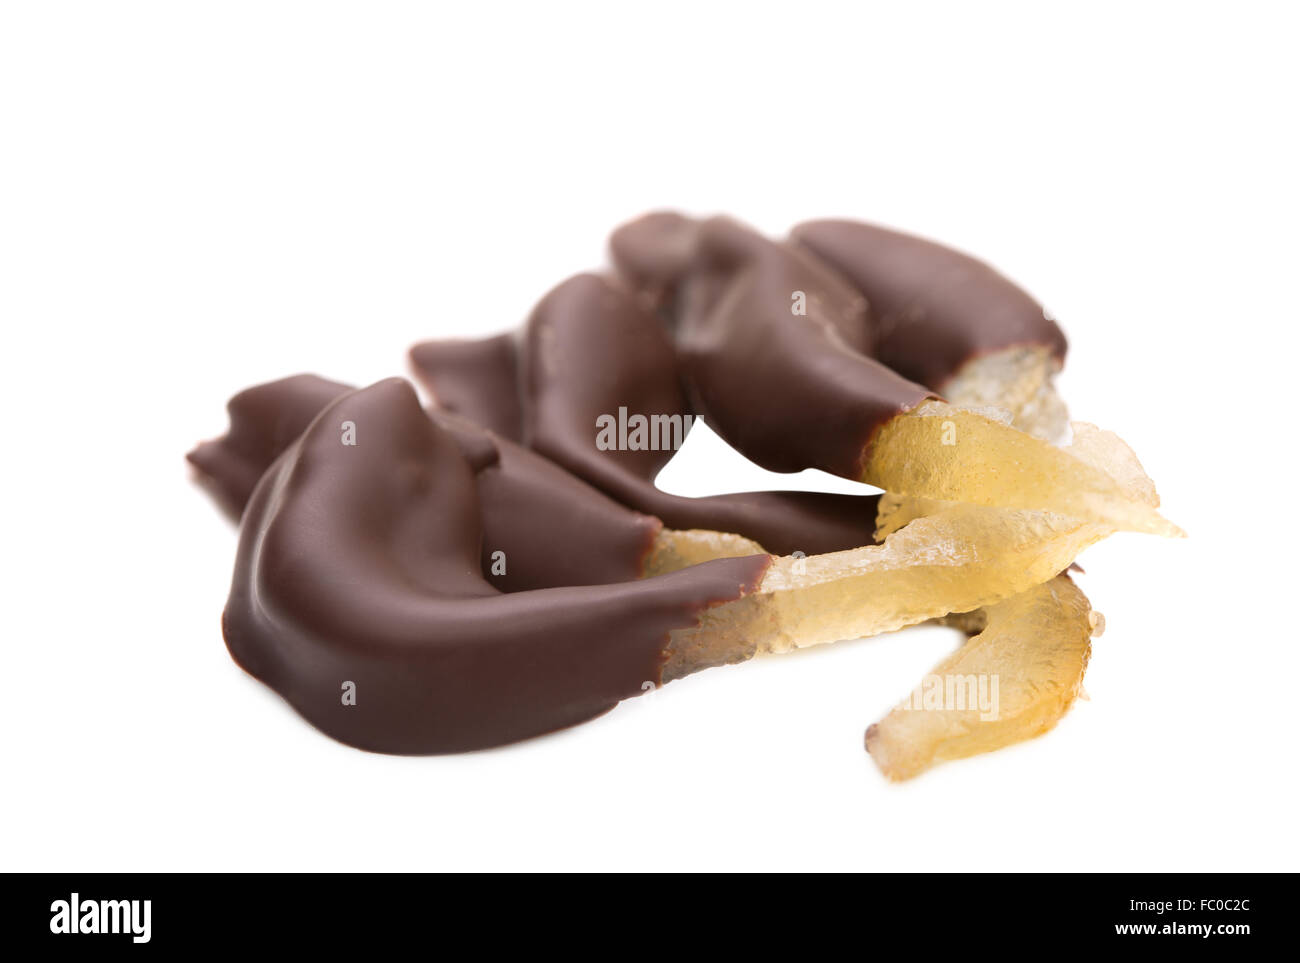 Image of lemon slices dipped in chocolate Stock Photo